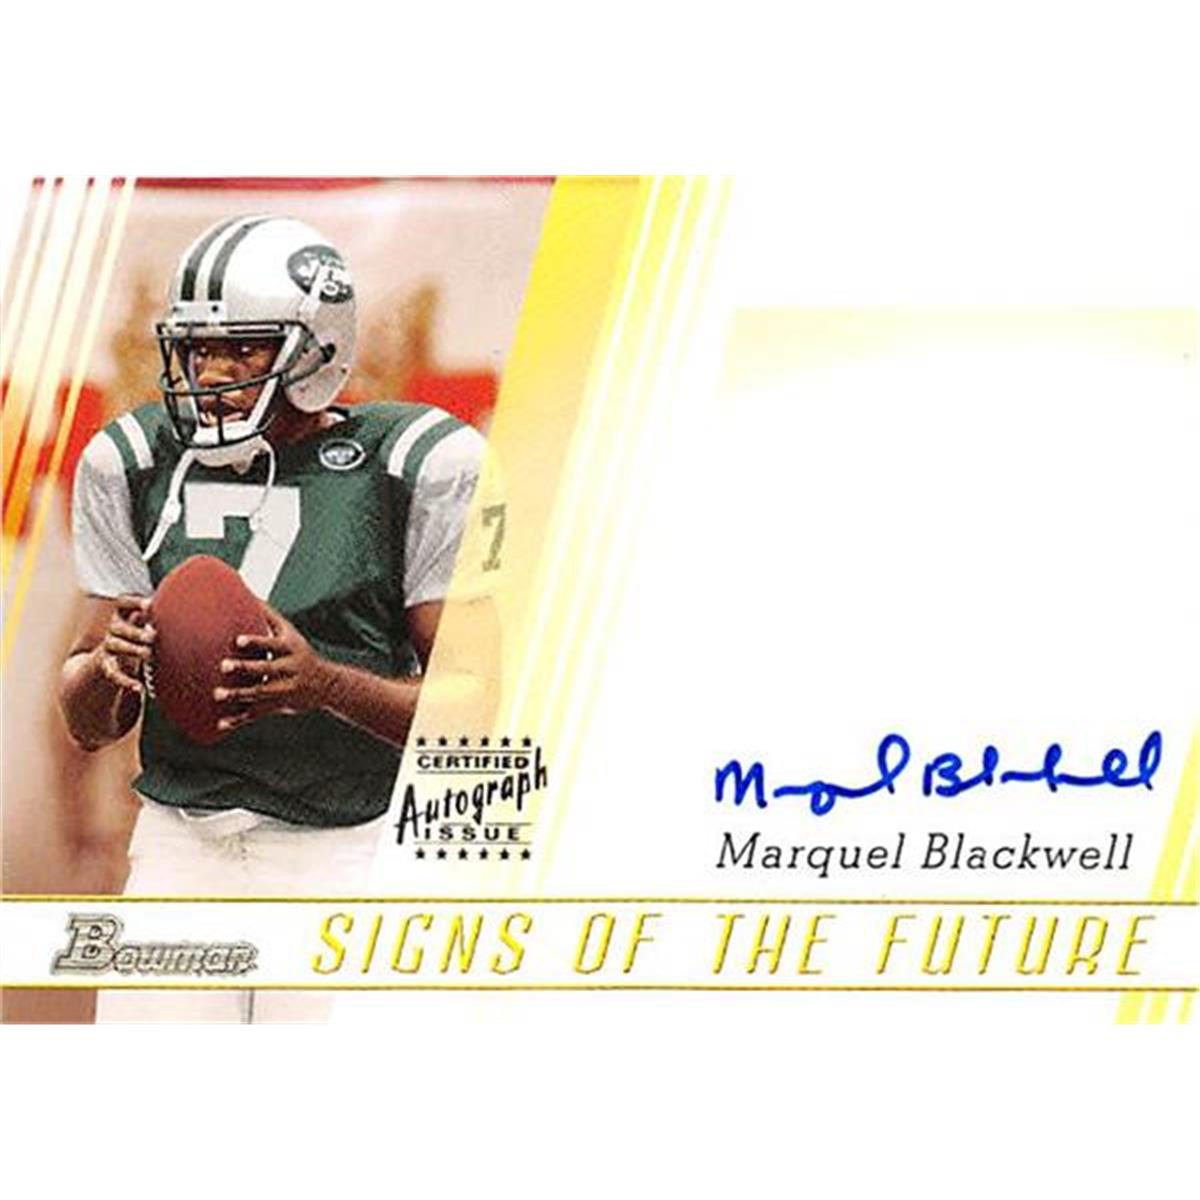 Picture of Autograph Warehouse 366608 Marquel Blackwell Autographed Football Card - 2003 Topps Signs of the Future SFMB Rookie